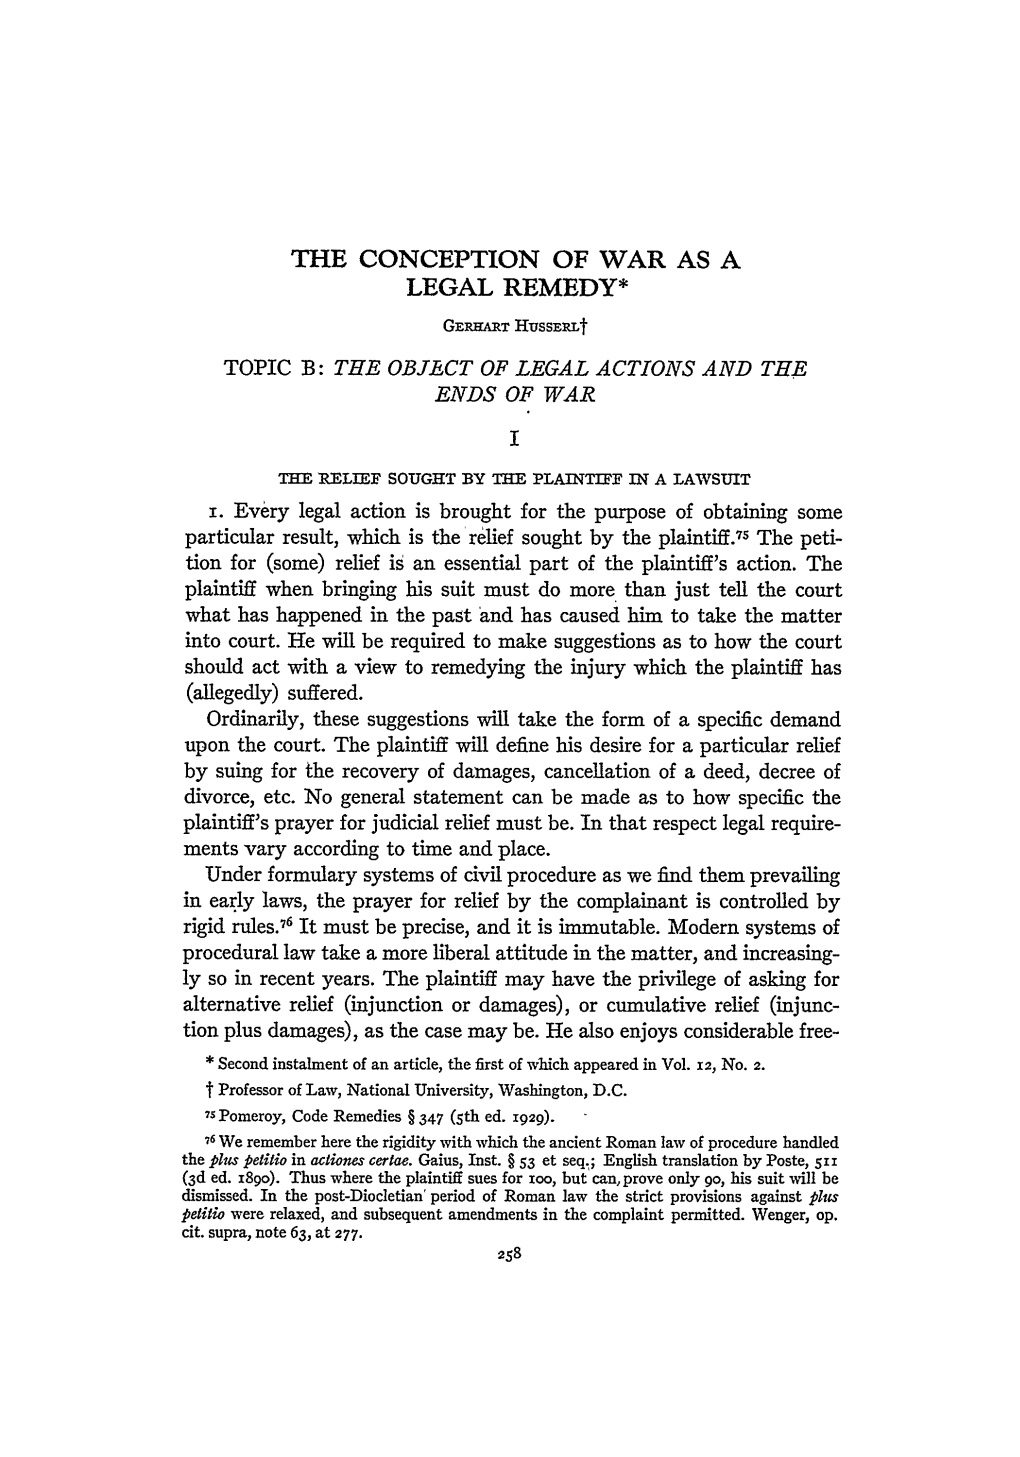 The Conception of War As a Legal Remedy*